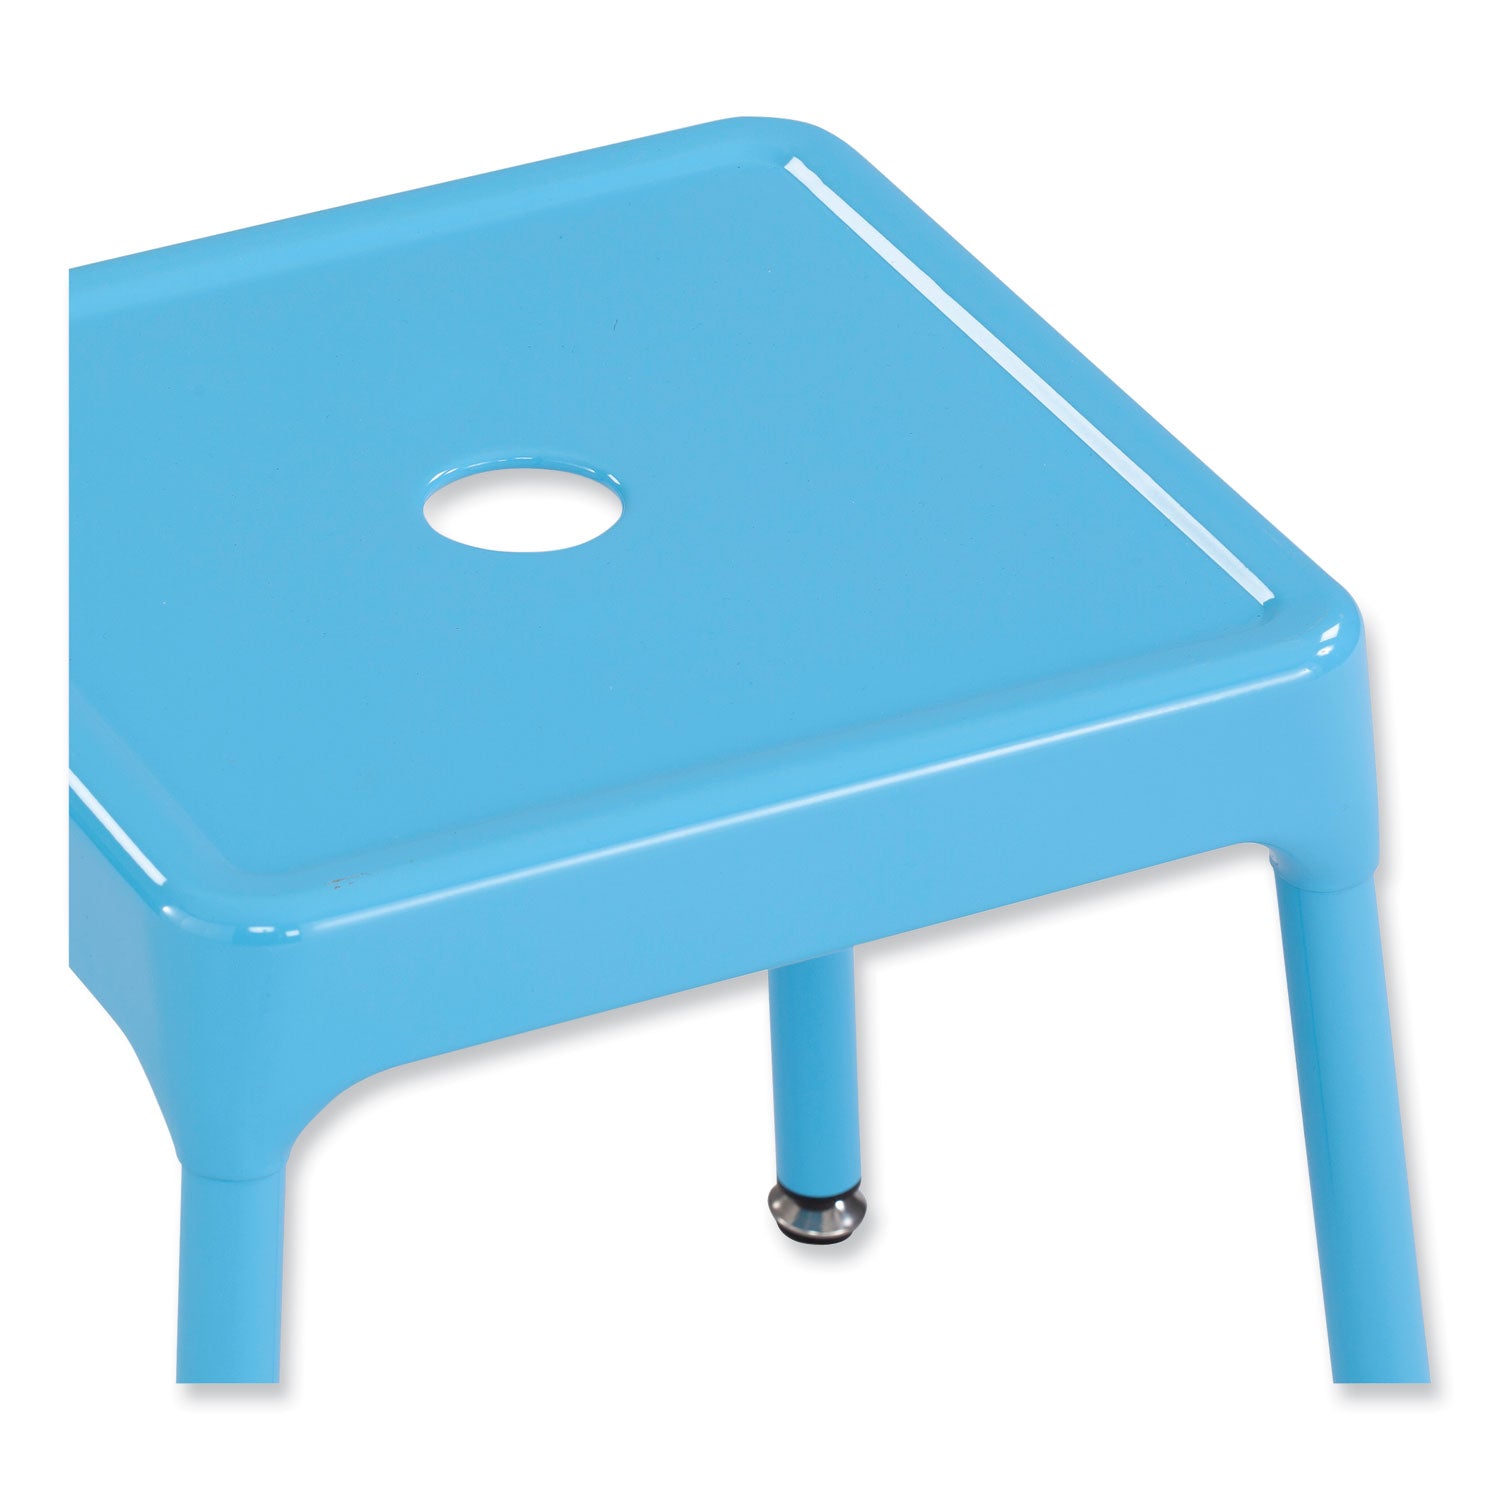 steel-guest-stool-backless-supports-up-to-275-lb-15-to-155-seat-height-baby-blueseat-base-ships-in-1-3-business-days_saf6603bu - 3